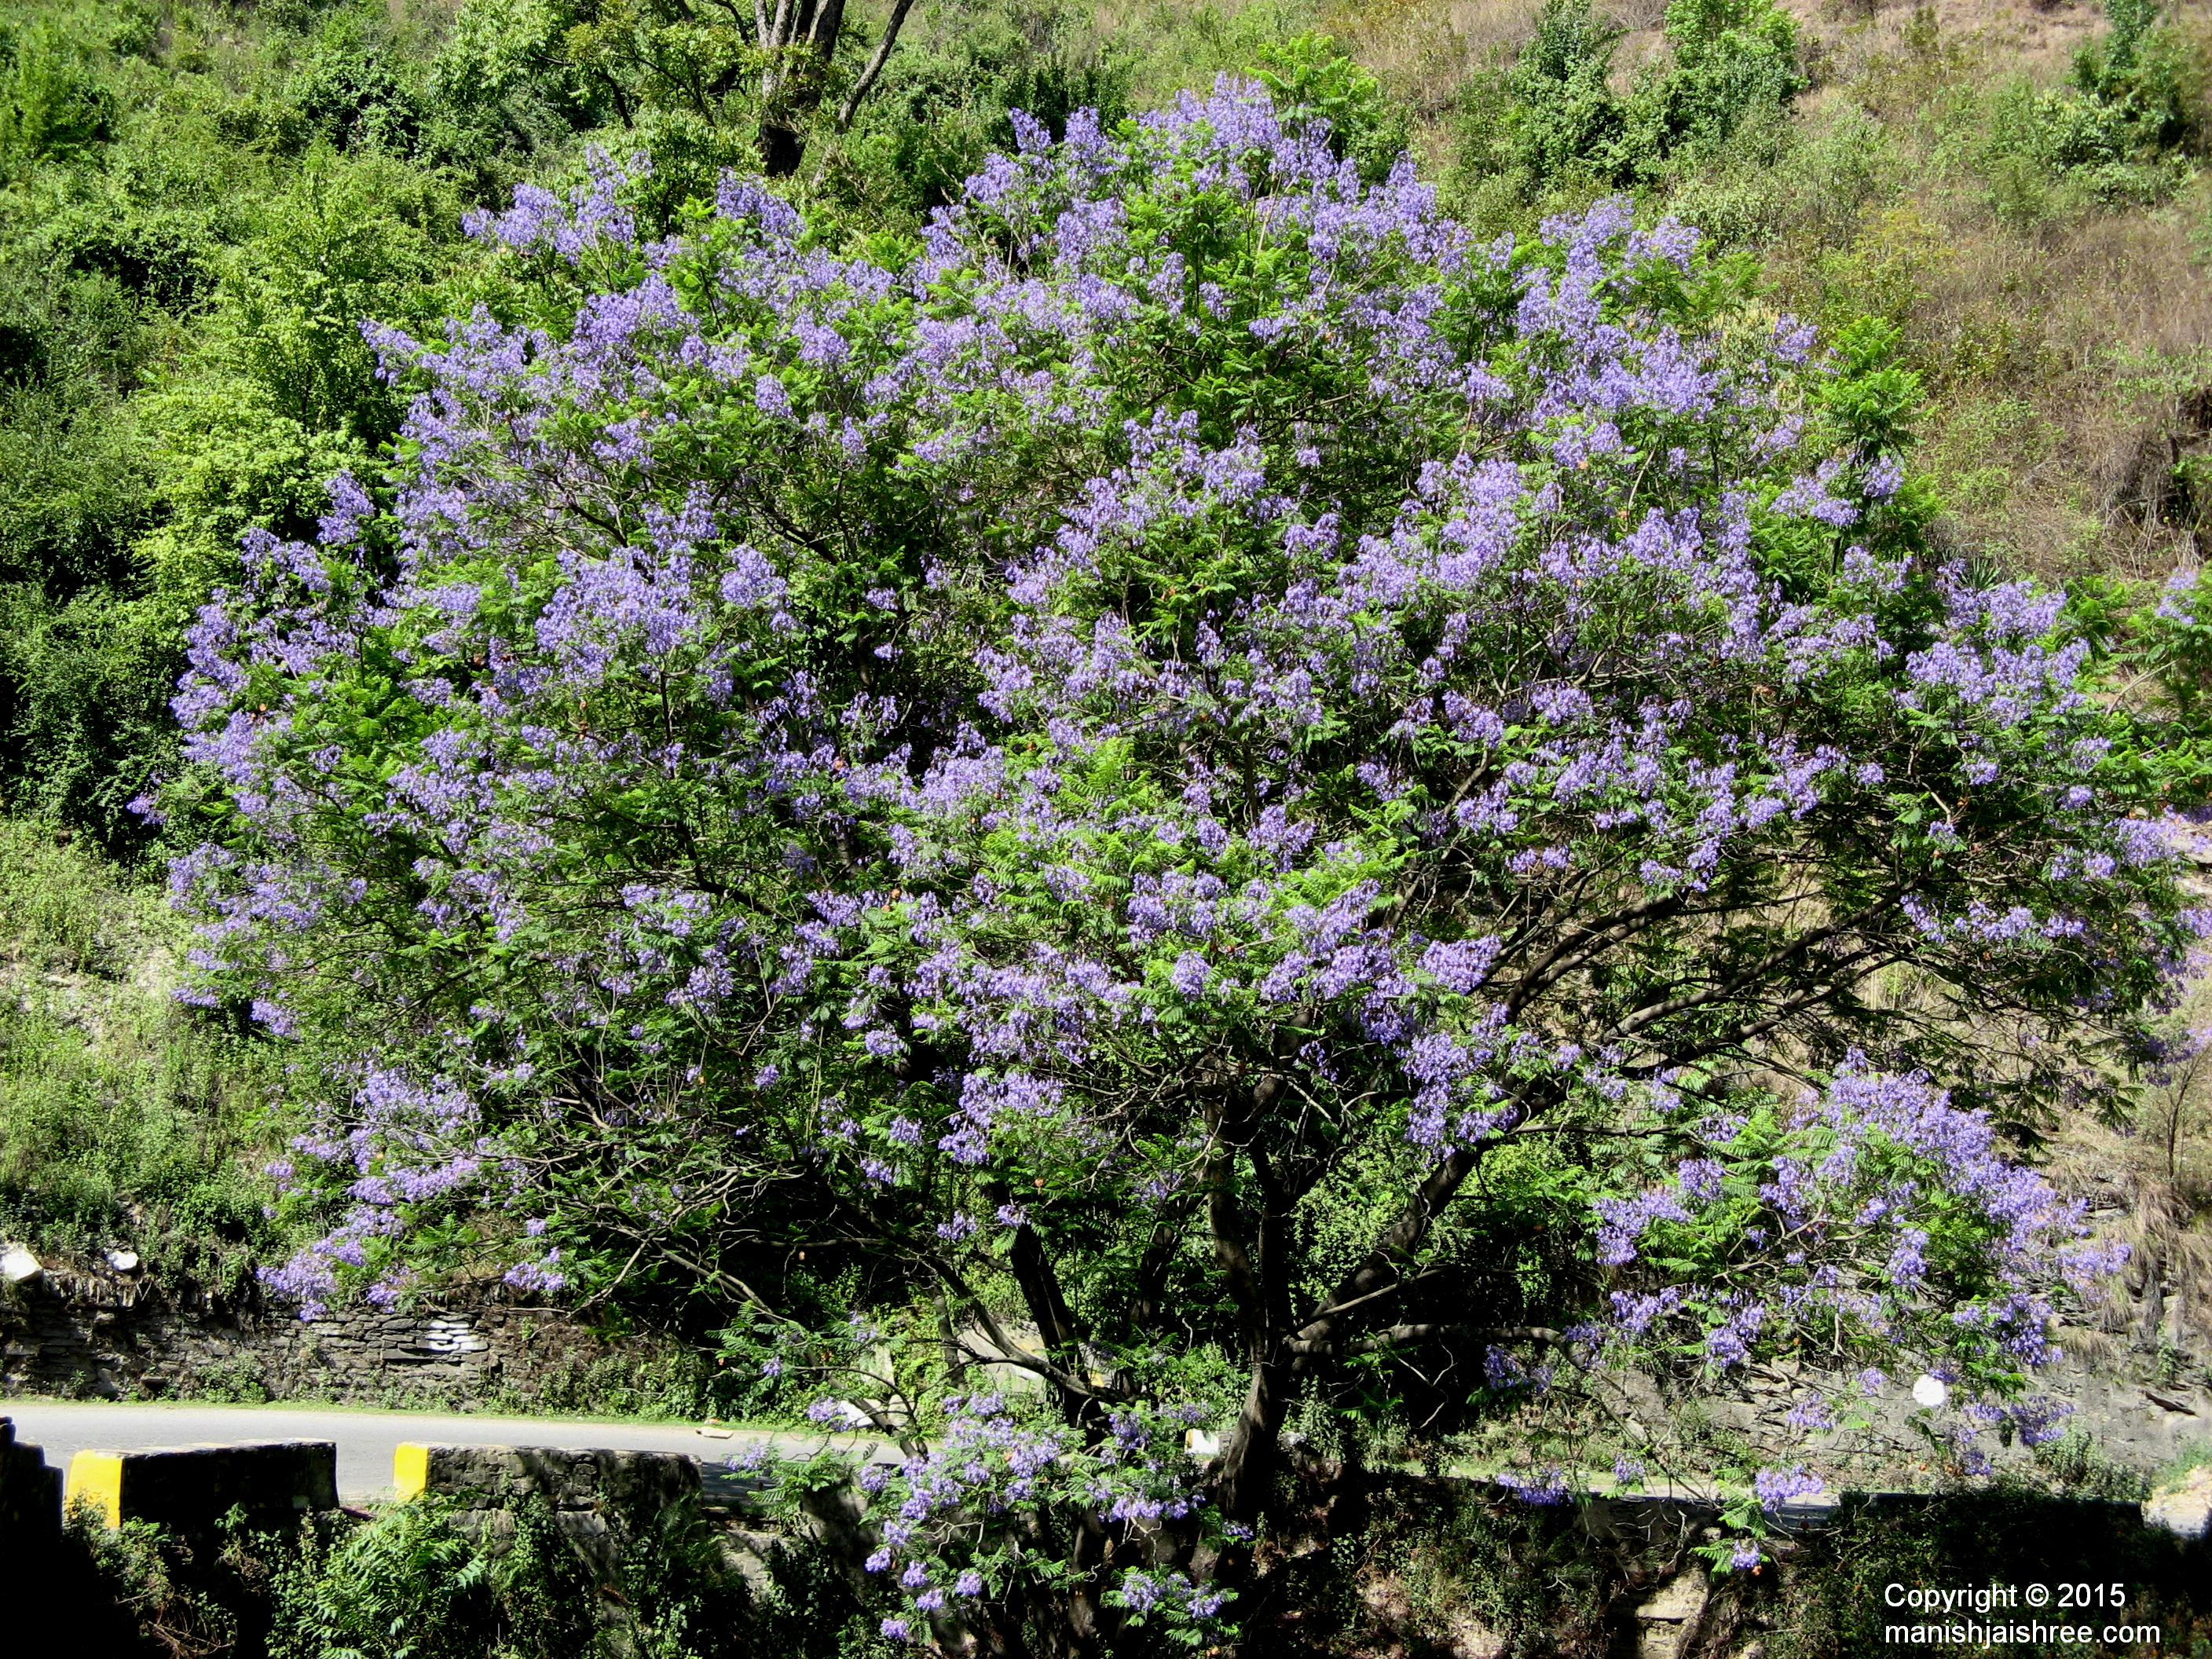 The blossoming purple flower tree